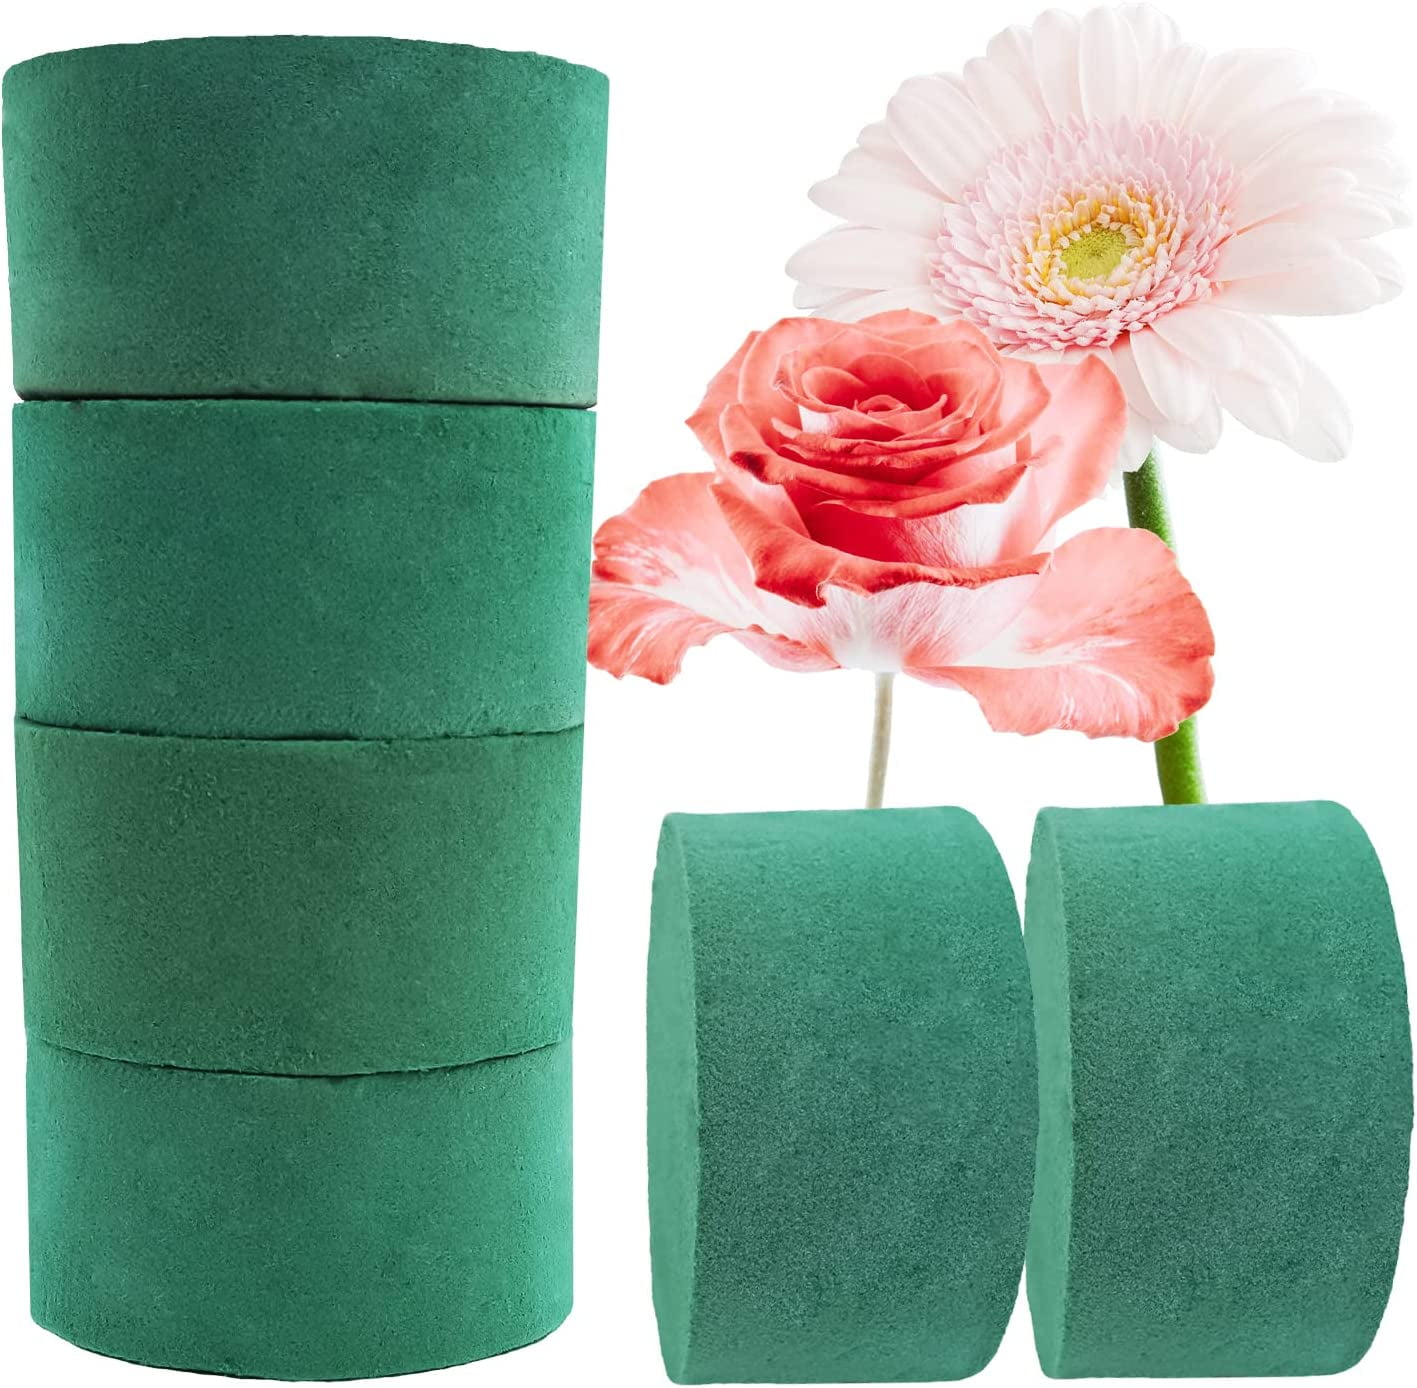 Caliko 6 Pcs Floral foam wet cylinder Elevate Your Floral Artistry with  florists foam - Ideal for Fresh and Artificial Flowers in Wedding Decor,  Funeral Arrangements, and DIY Craft Projects. : 